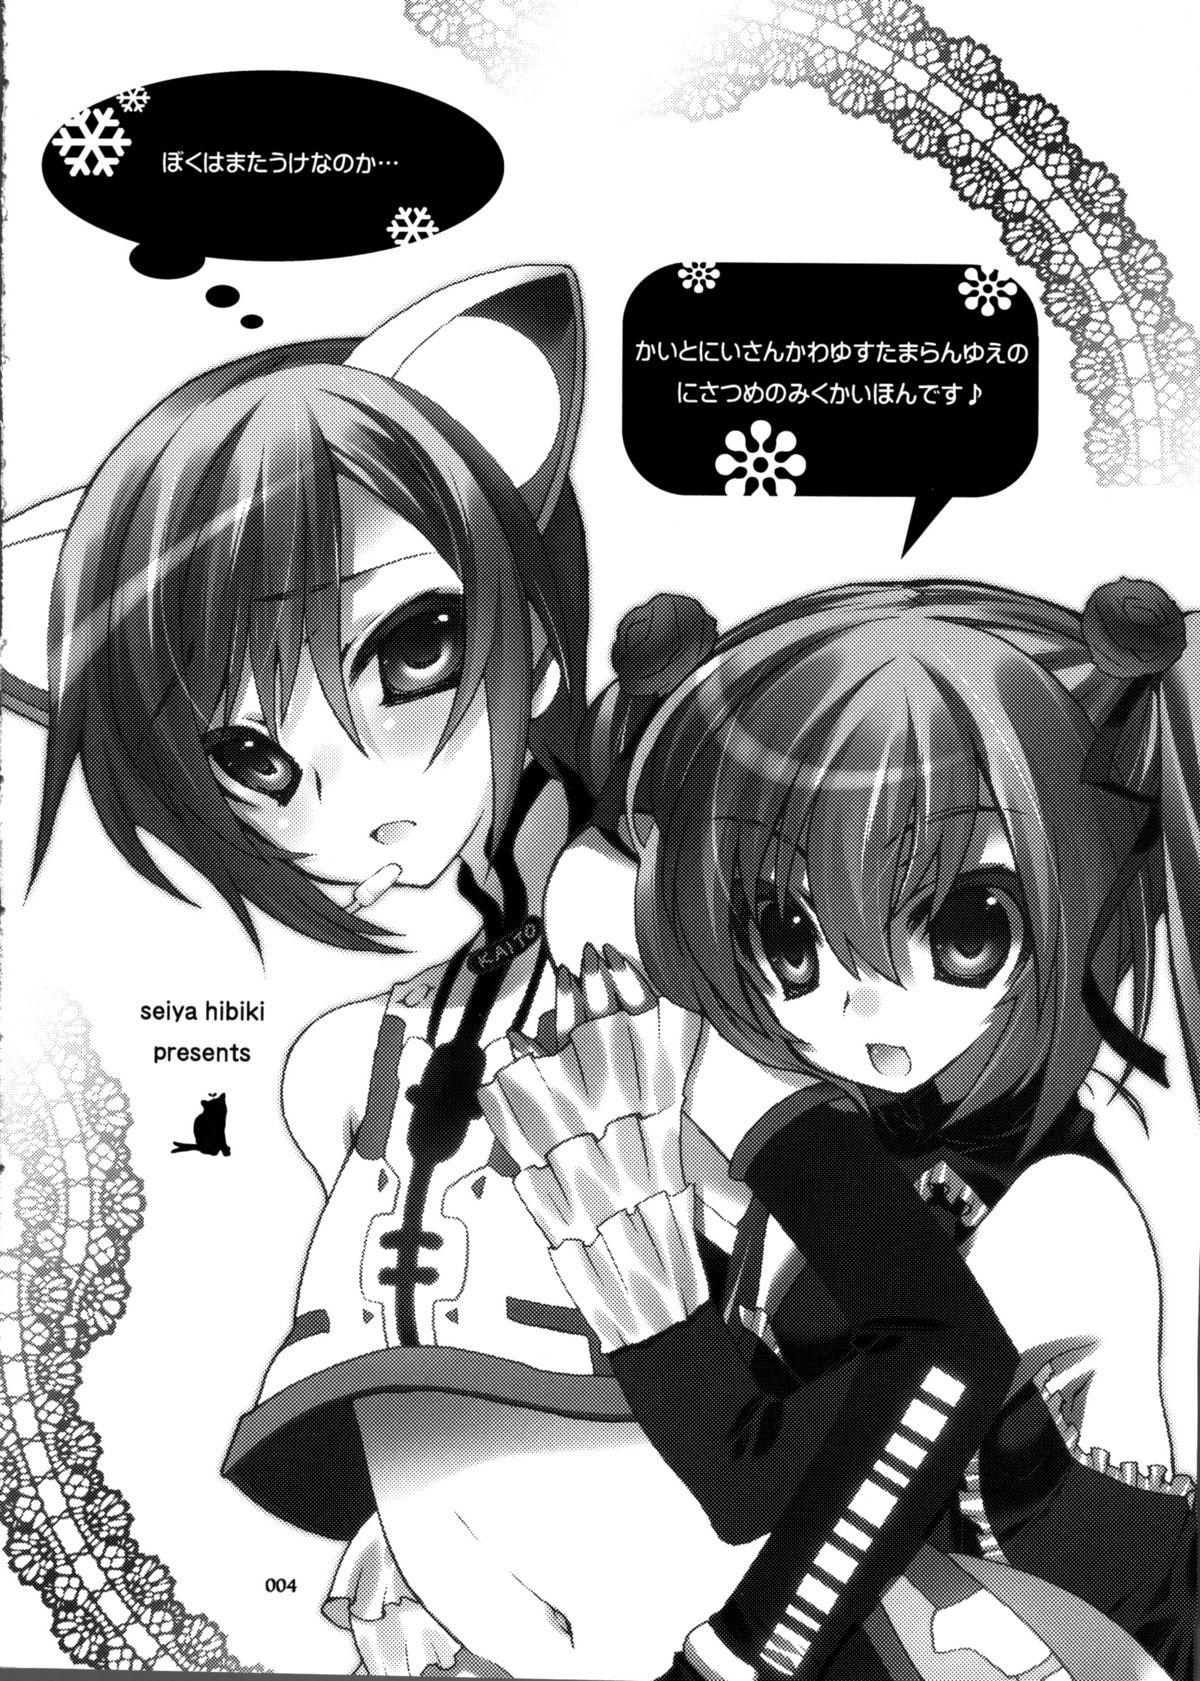 Dress infinito strega 2 - Vocaloid Pounded - Page 3